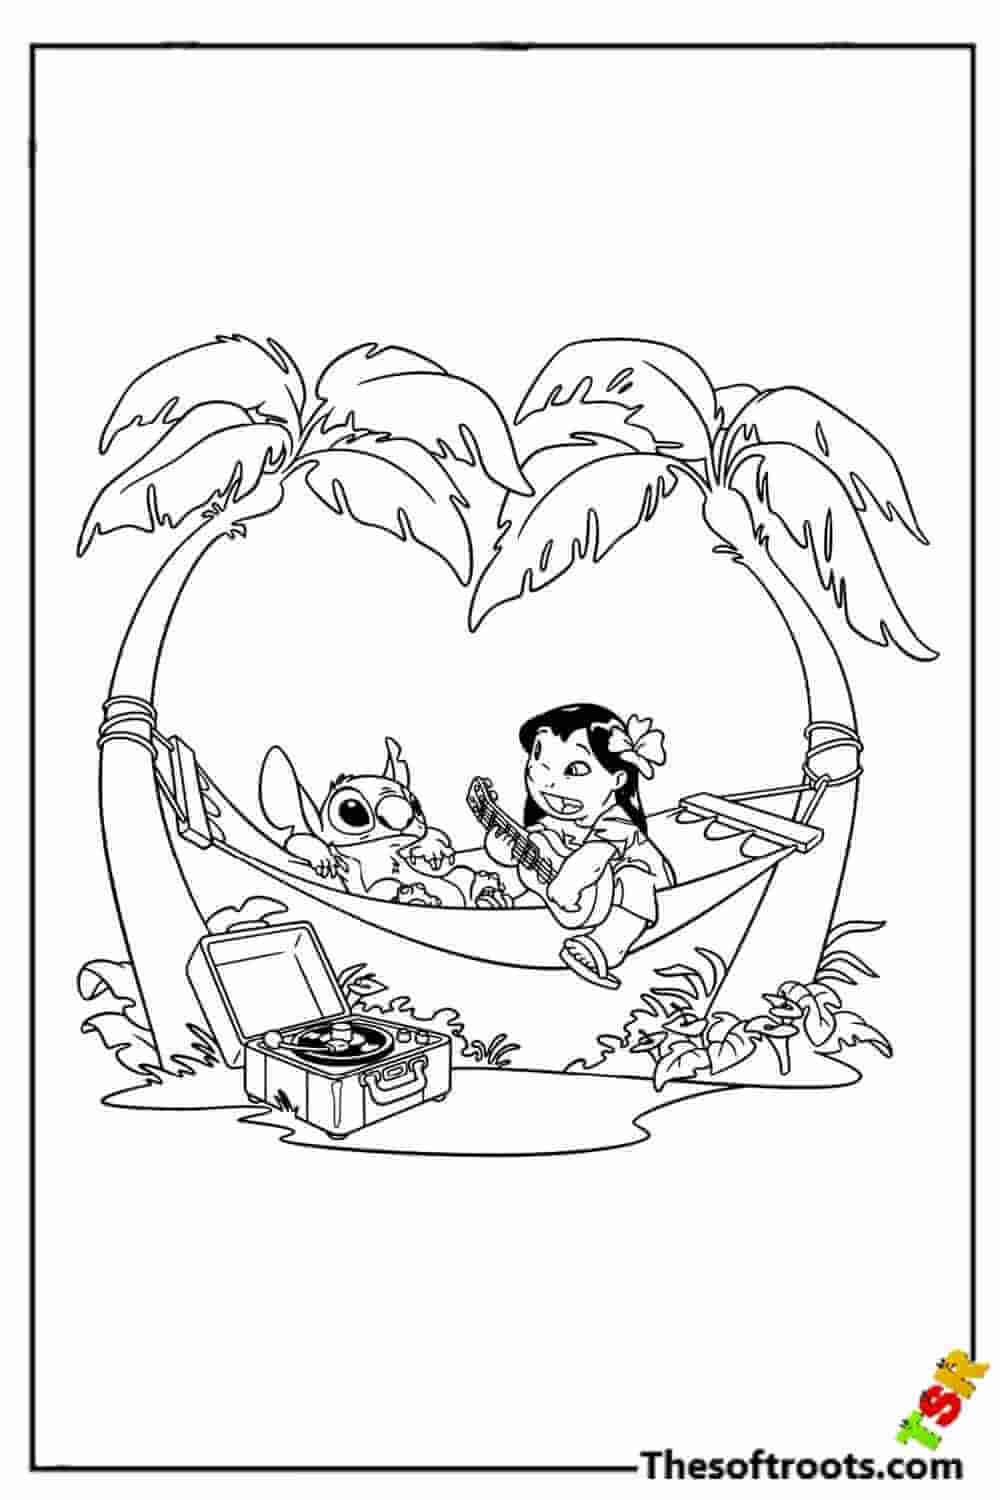 Lilo and Stitch under the Palm Tree coloring pages